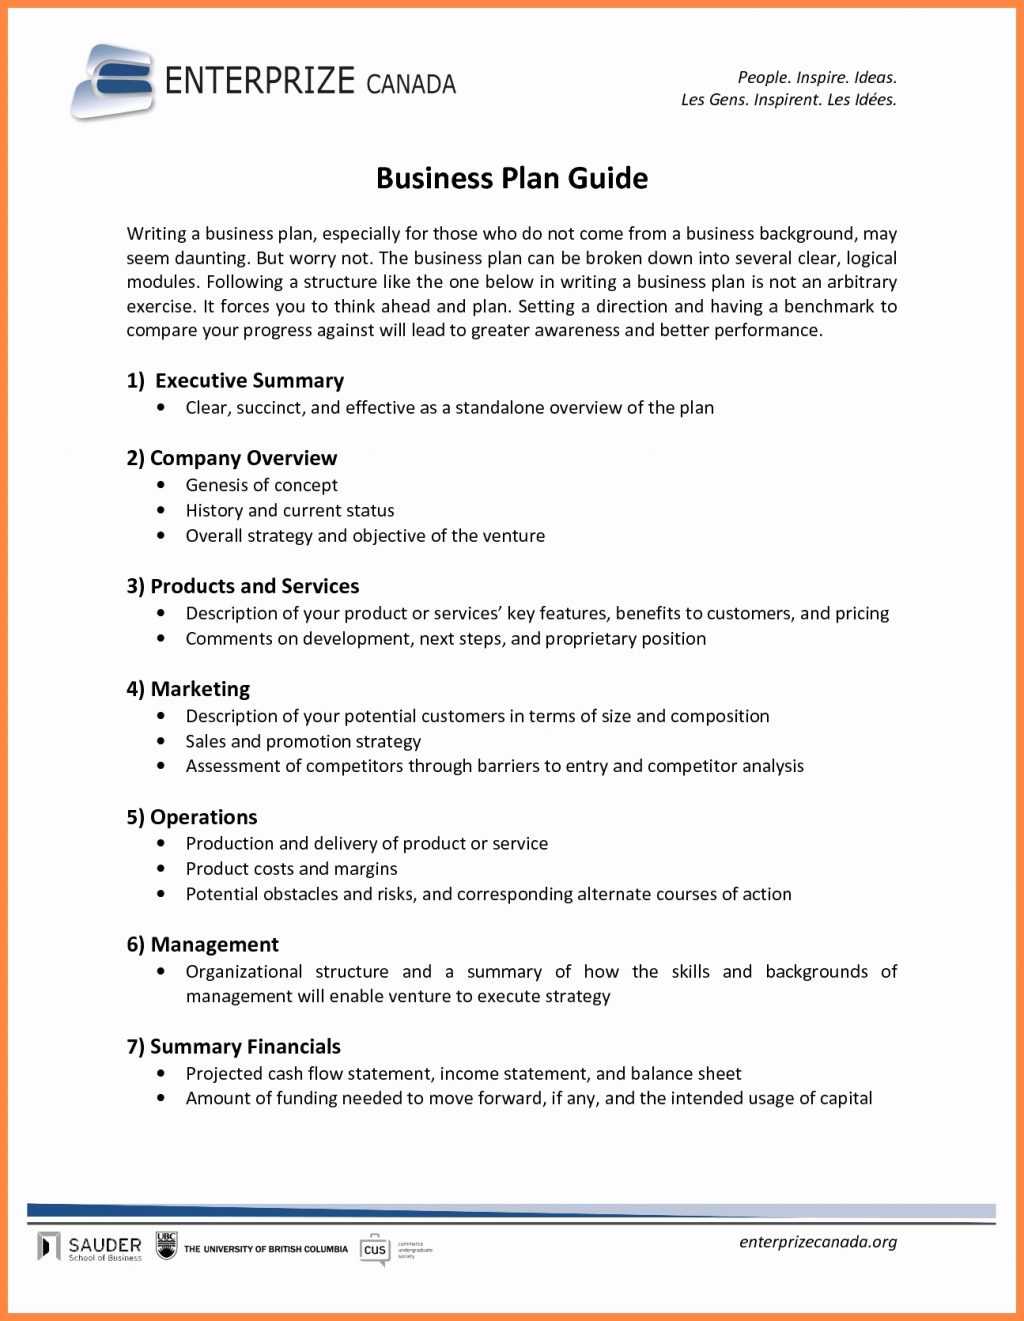 Business Plans Myth Plan Template Commerce Website Ecommerce In Ecommerce Website Business Plan Template